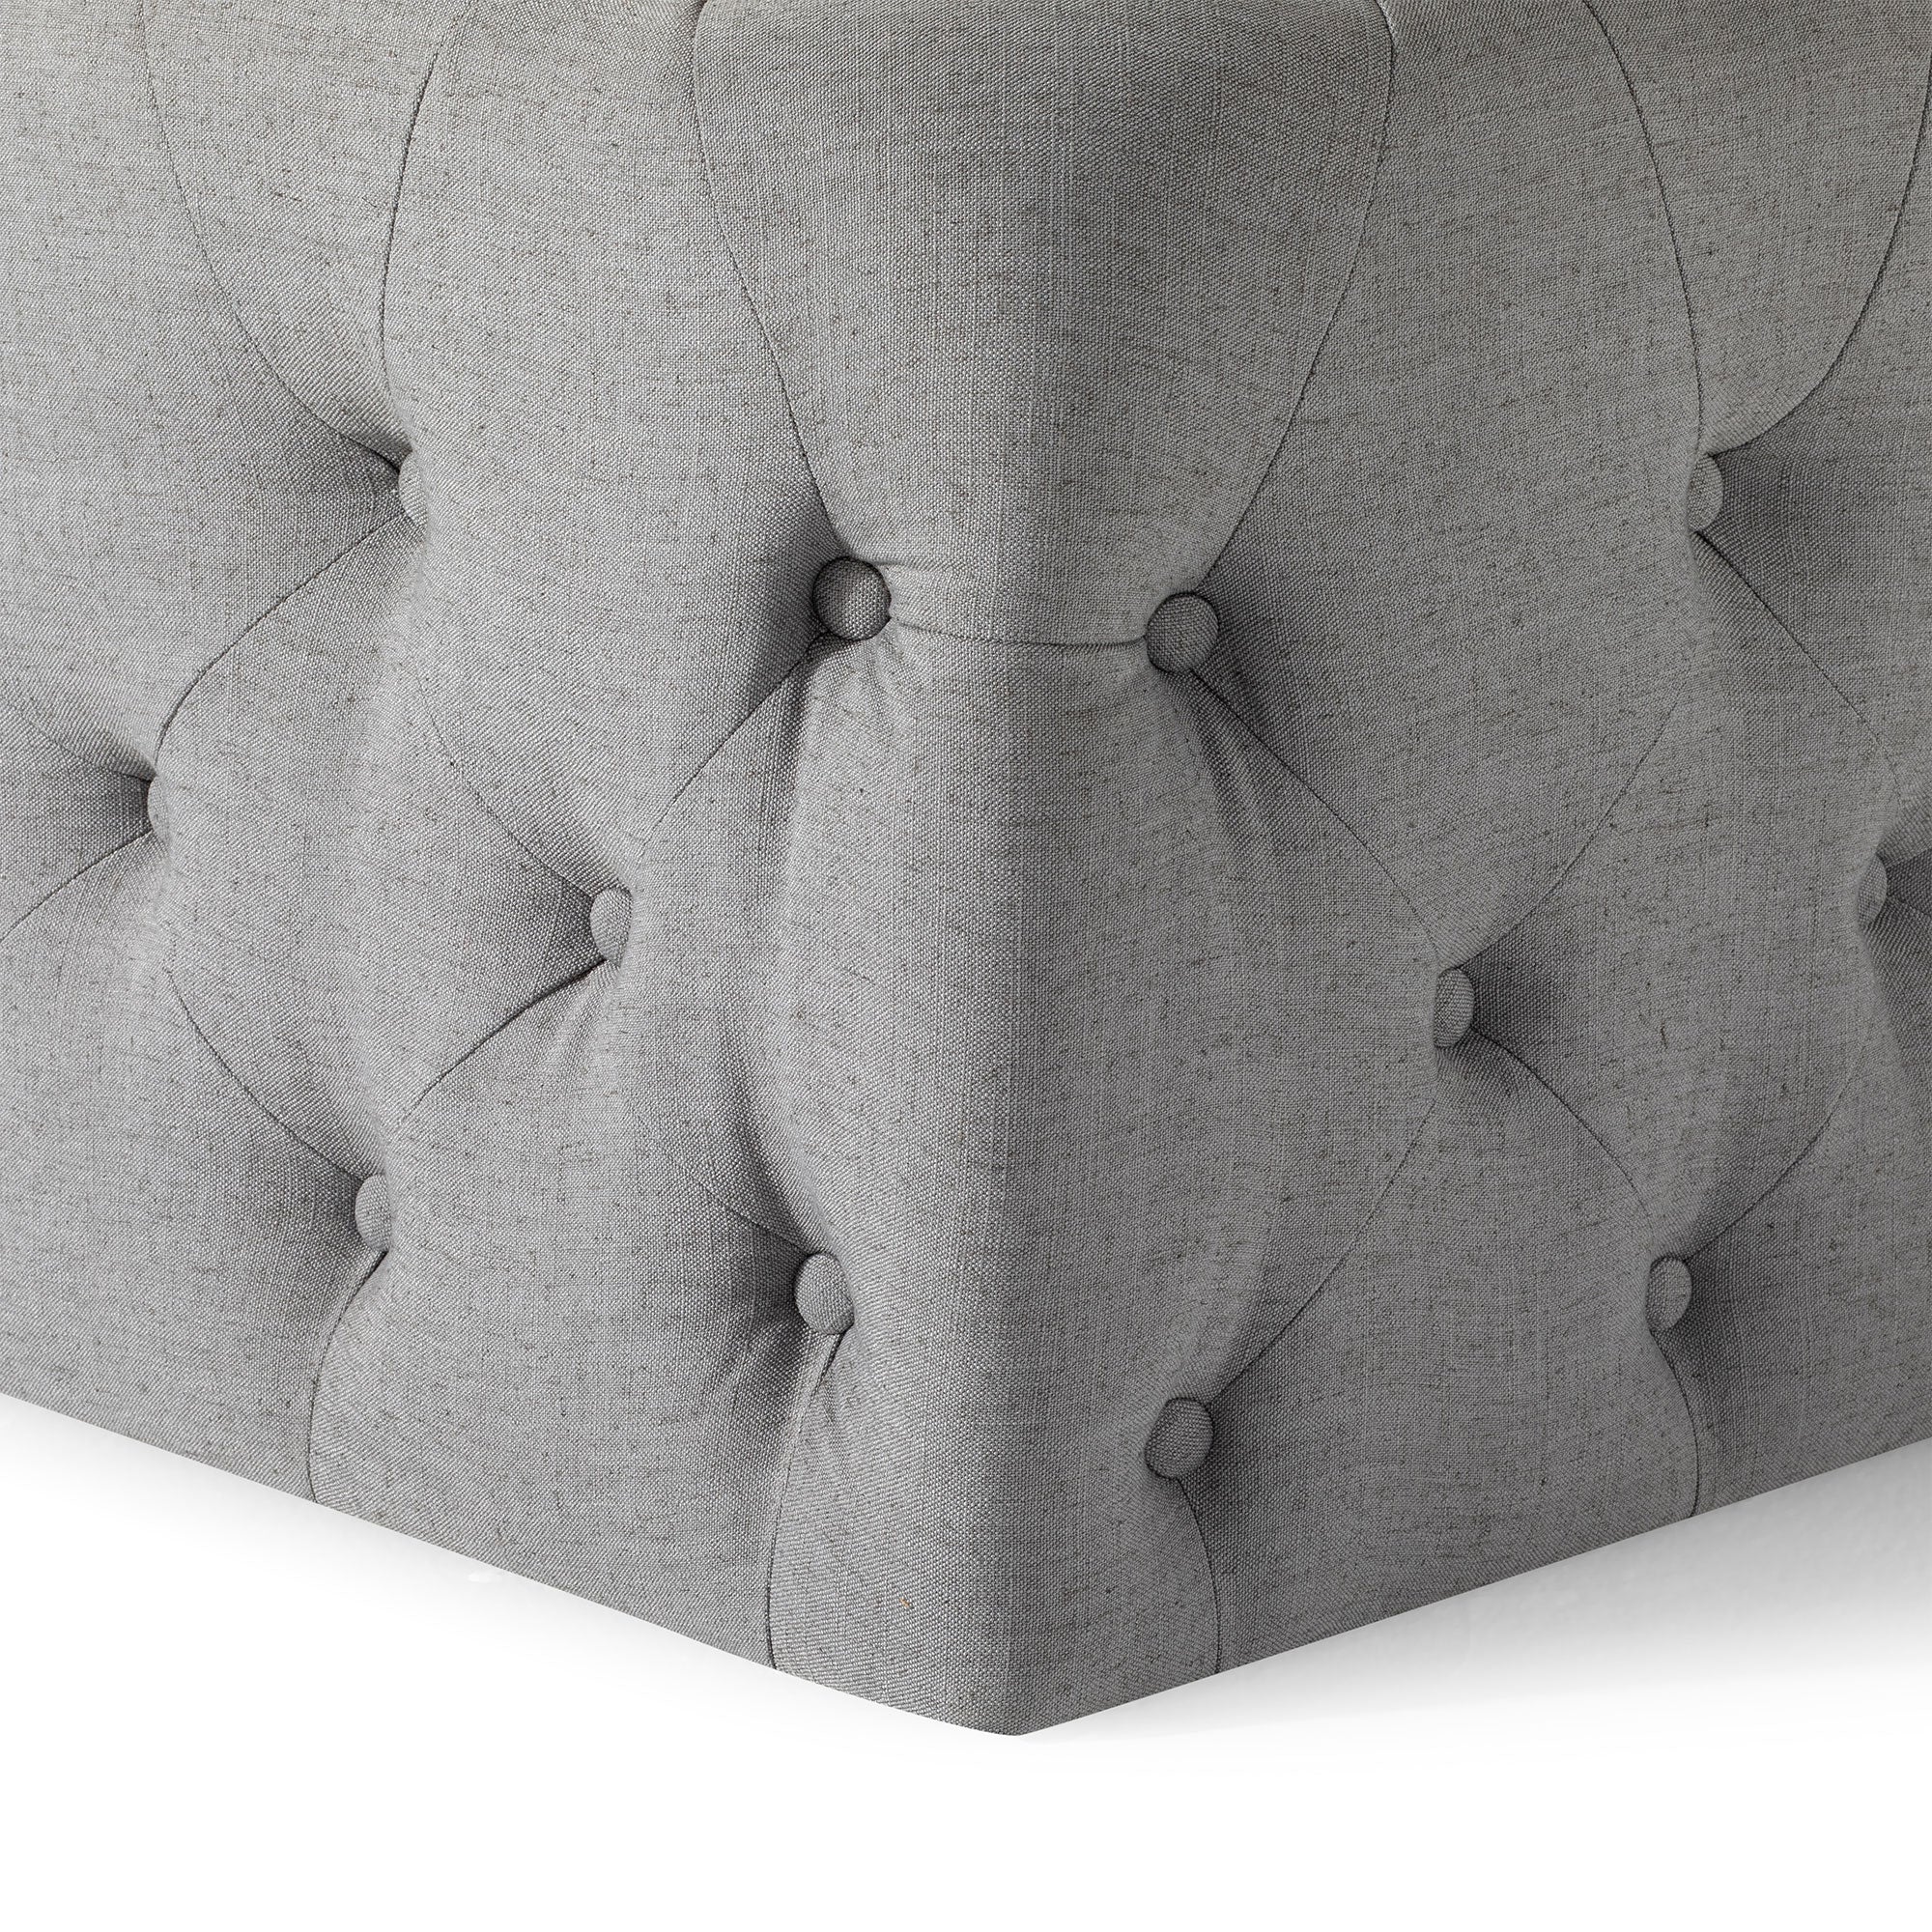 Henry Classical Ottoman in Slate Fabric Upholstery in Ottomans & Benches by Maven Lane